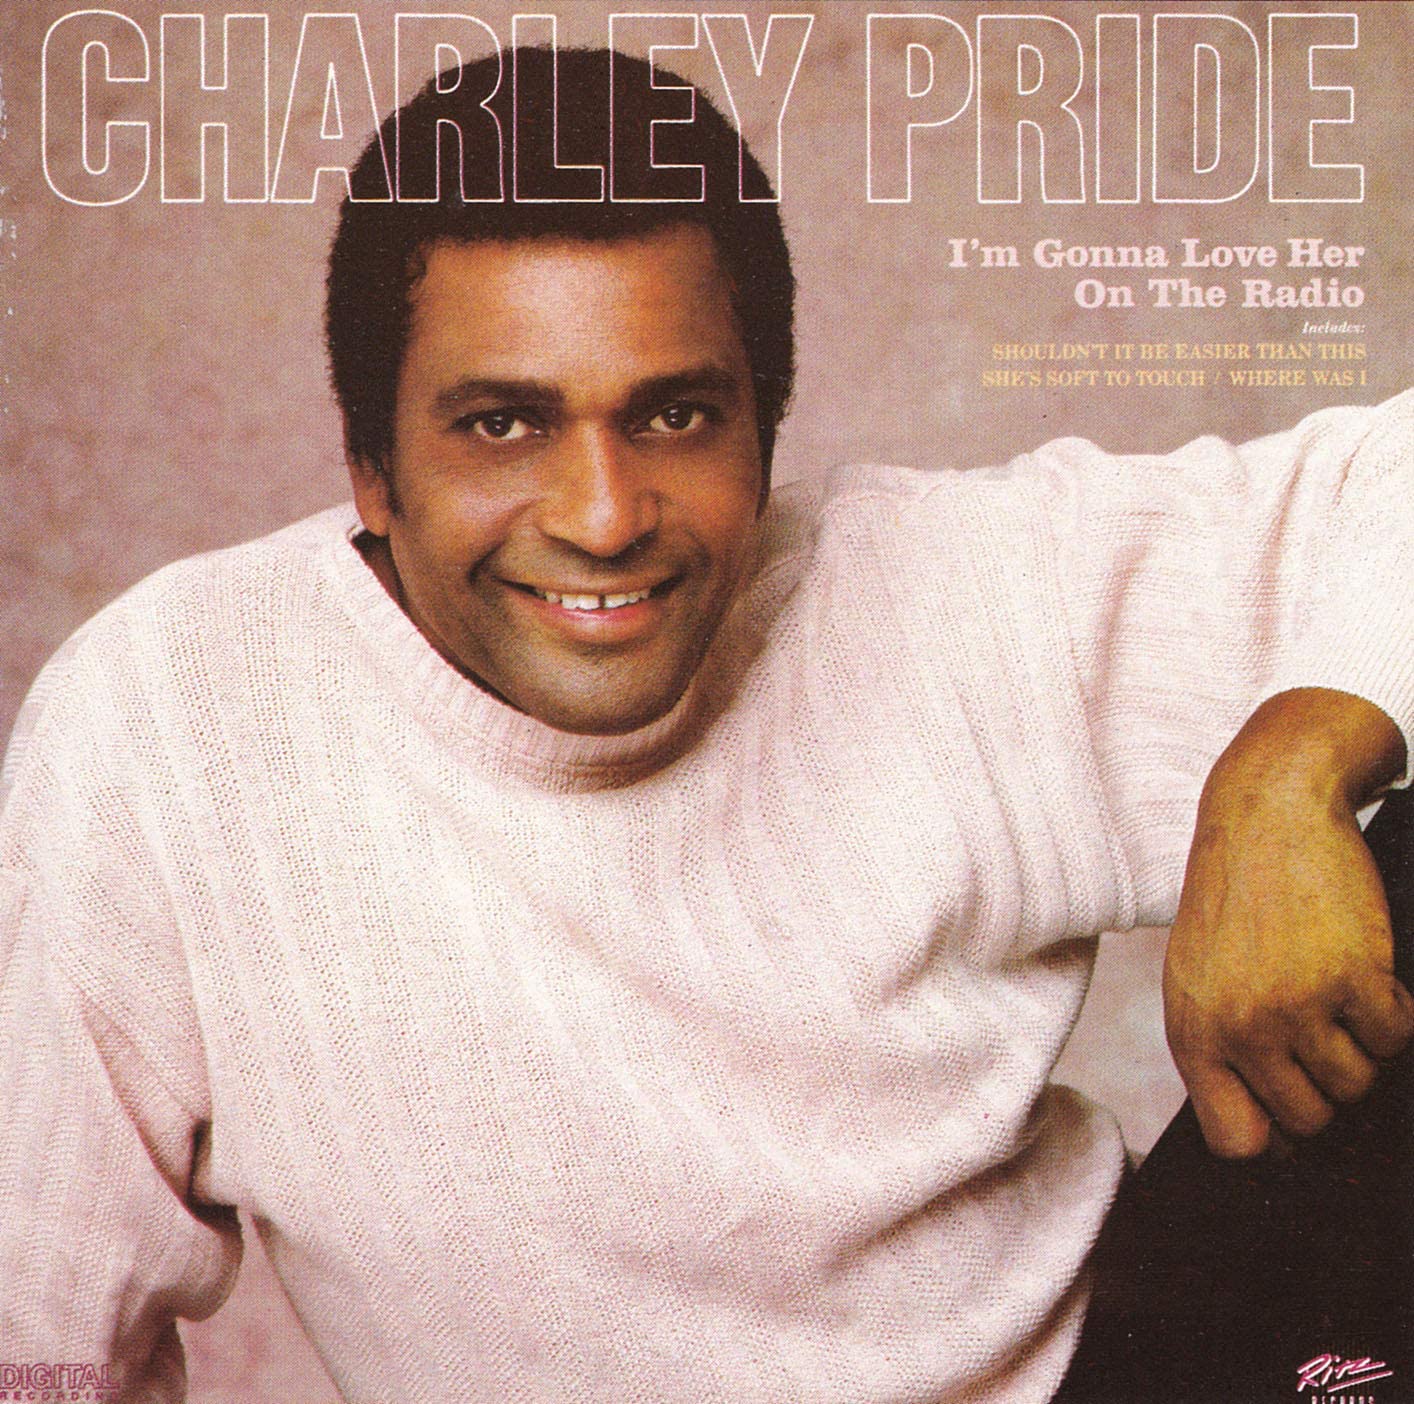 Charley Pride - I'm Gonna Love Her On The Radio Album Cover